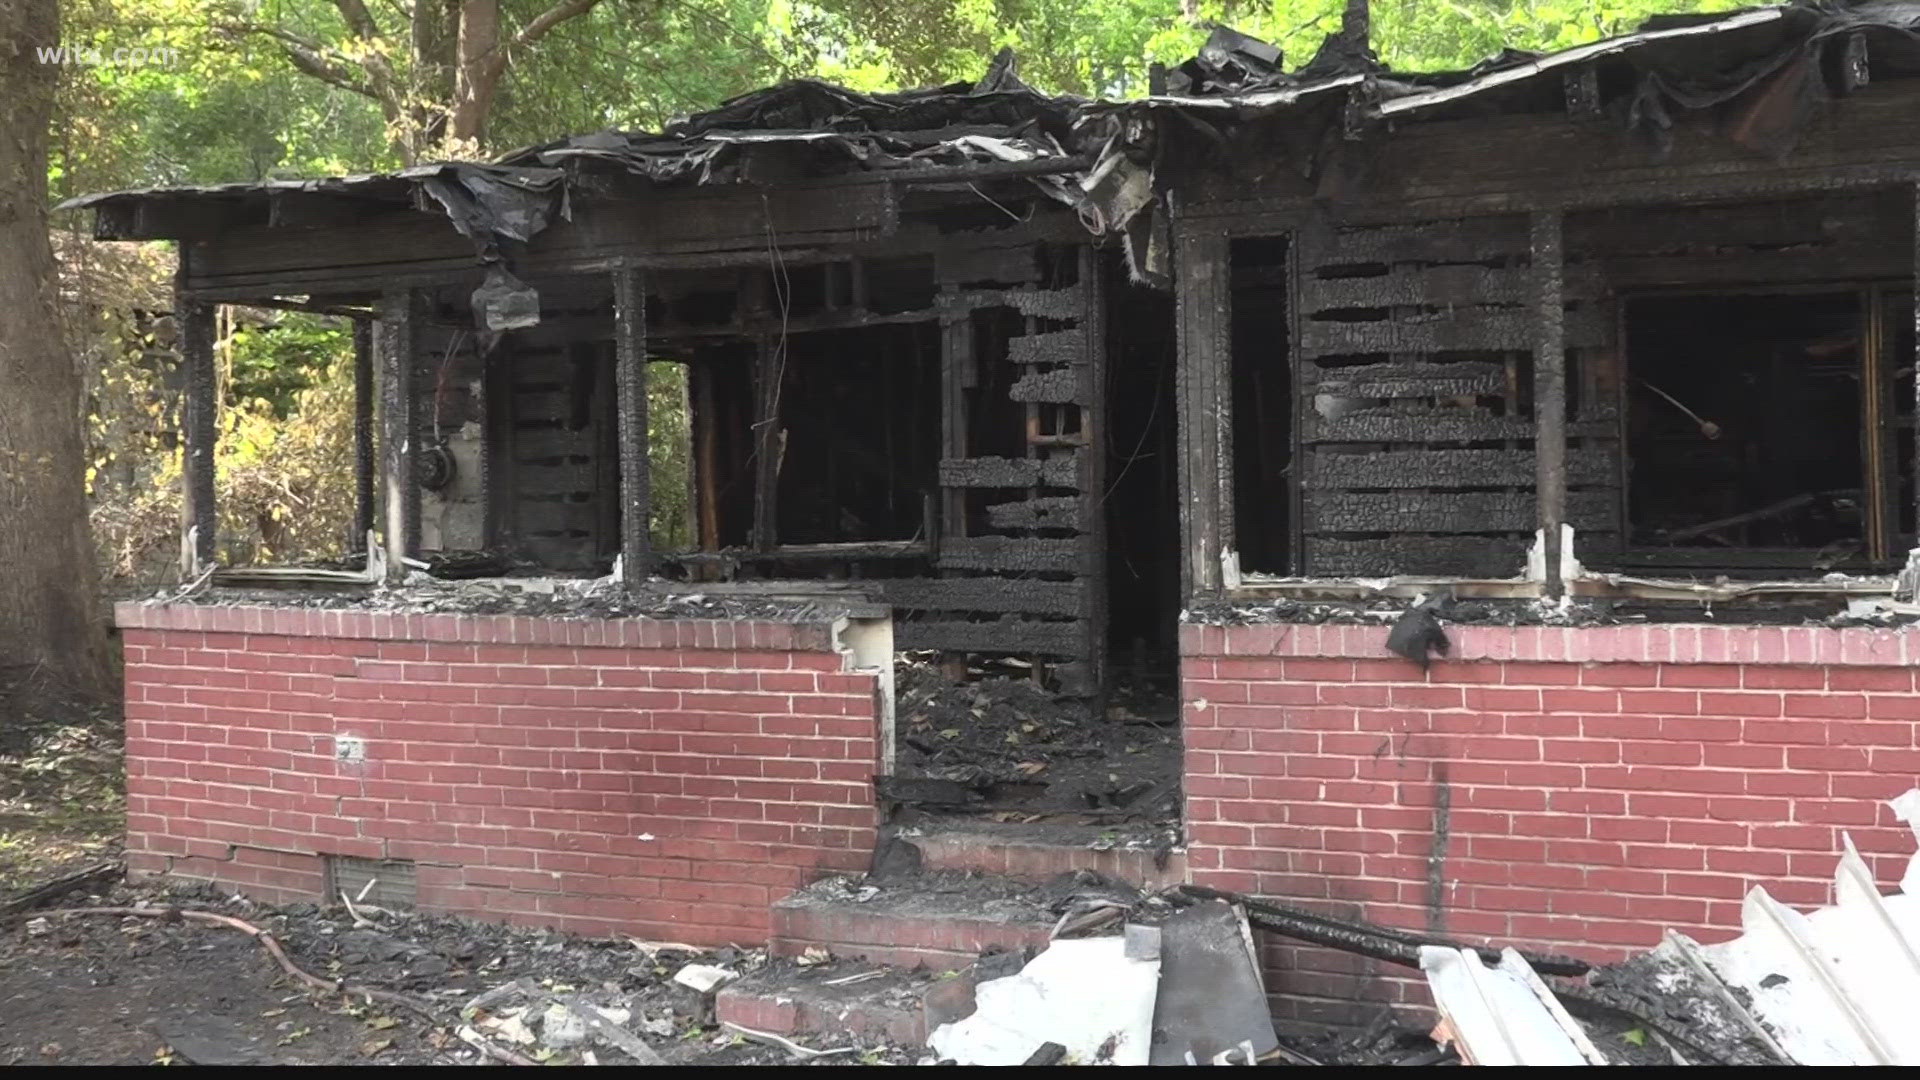 Shona Clark, 46, and her three-year-old grandson are dead following a home fire in Orangeburg house fire. Officials say Clark helped save lives during the fire.